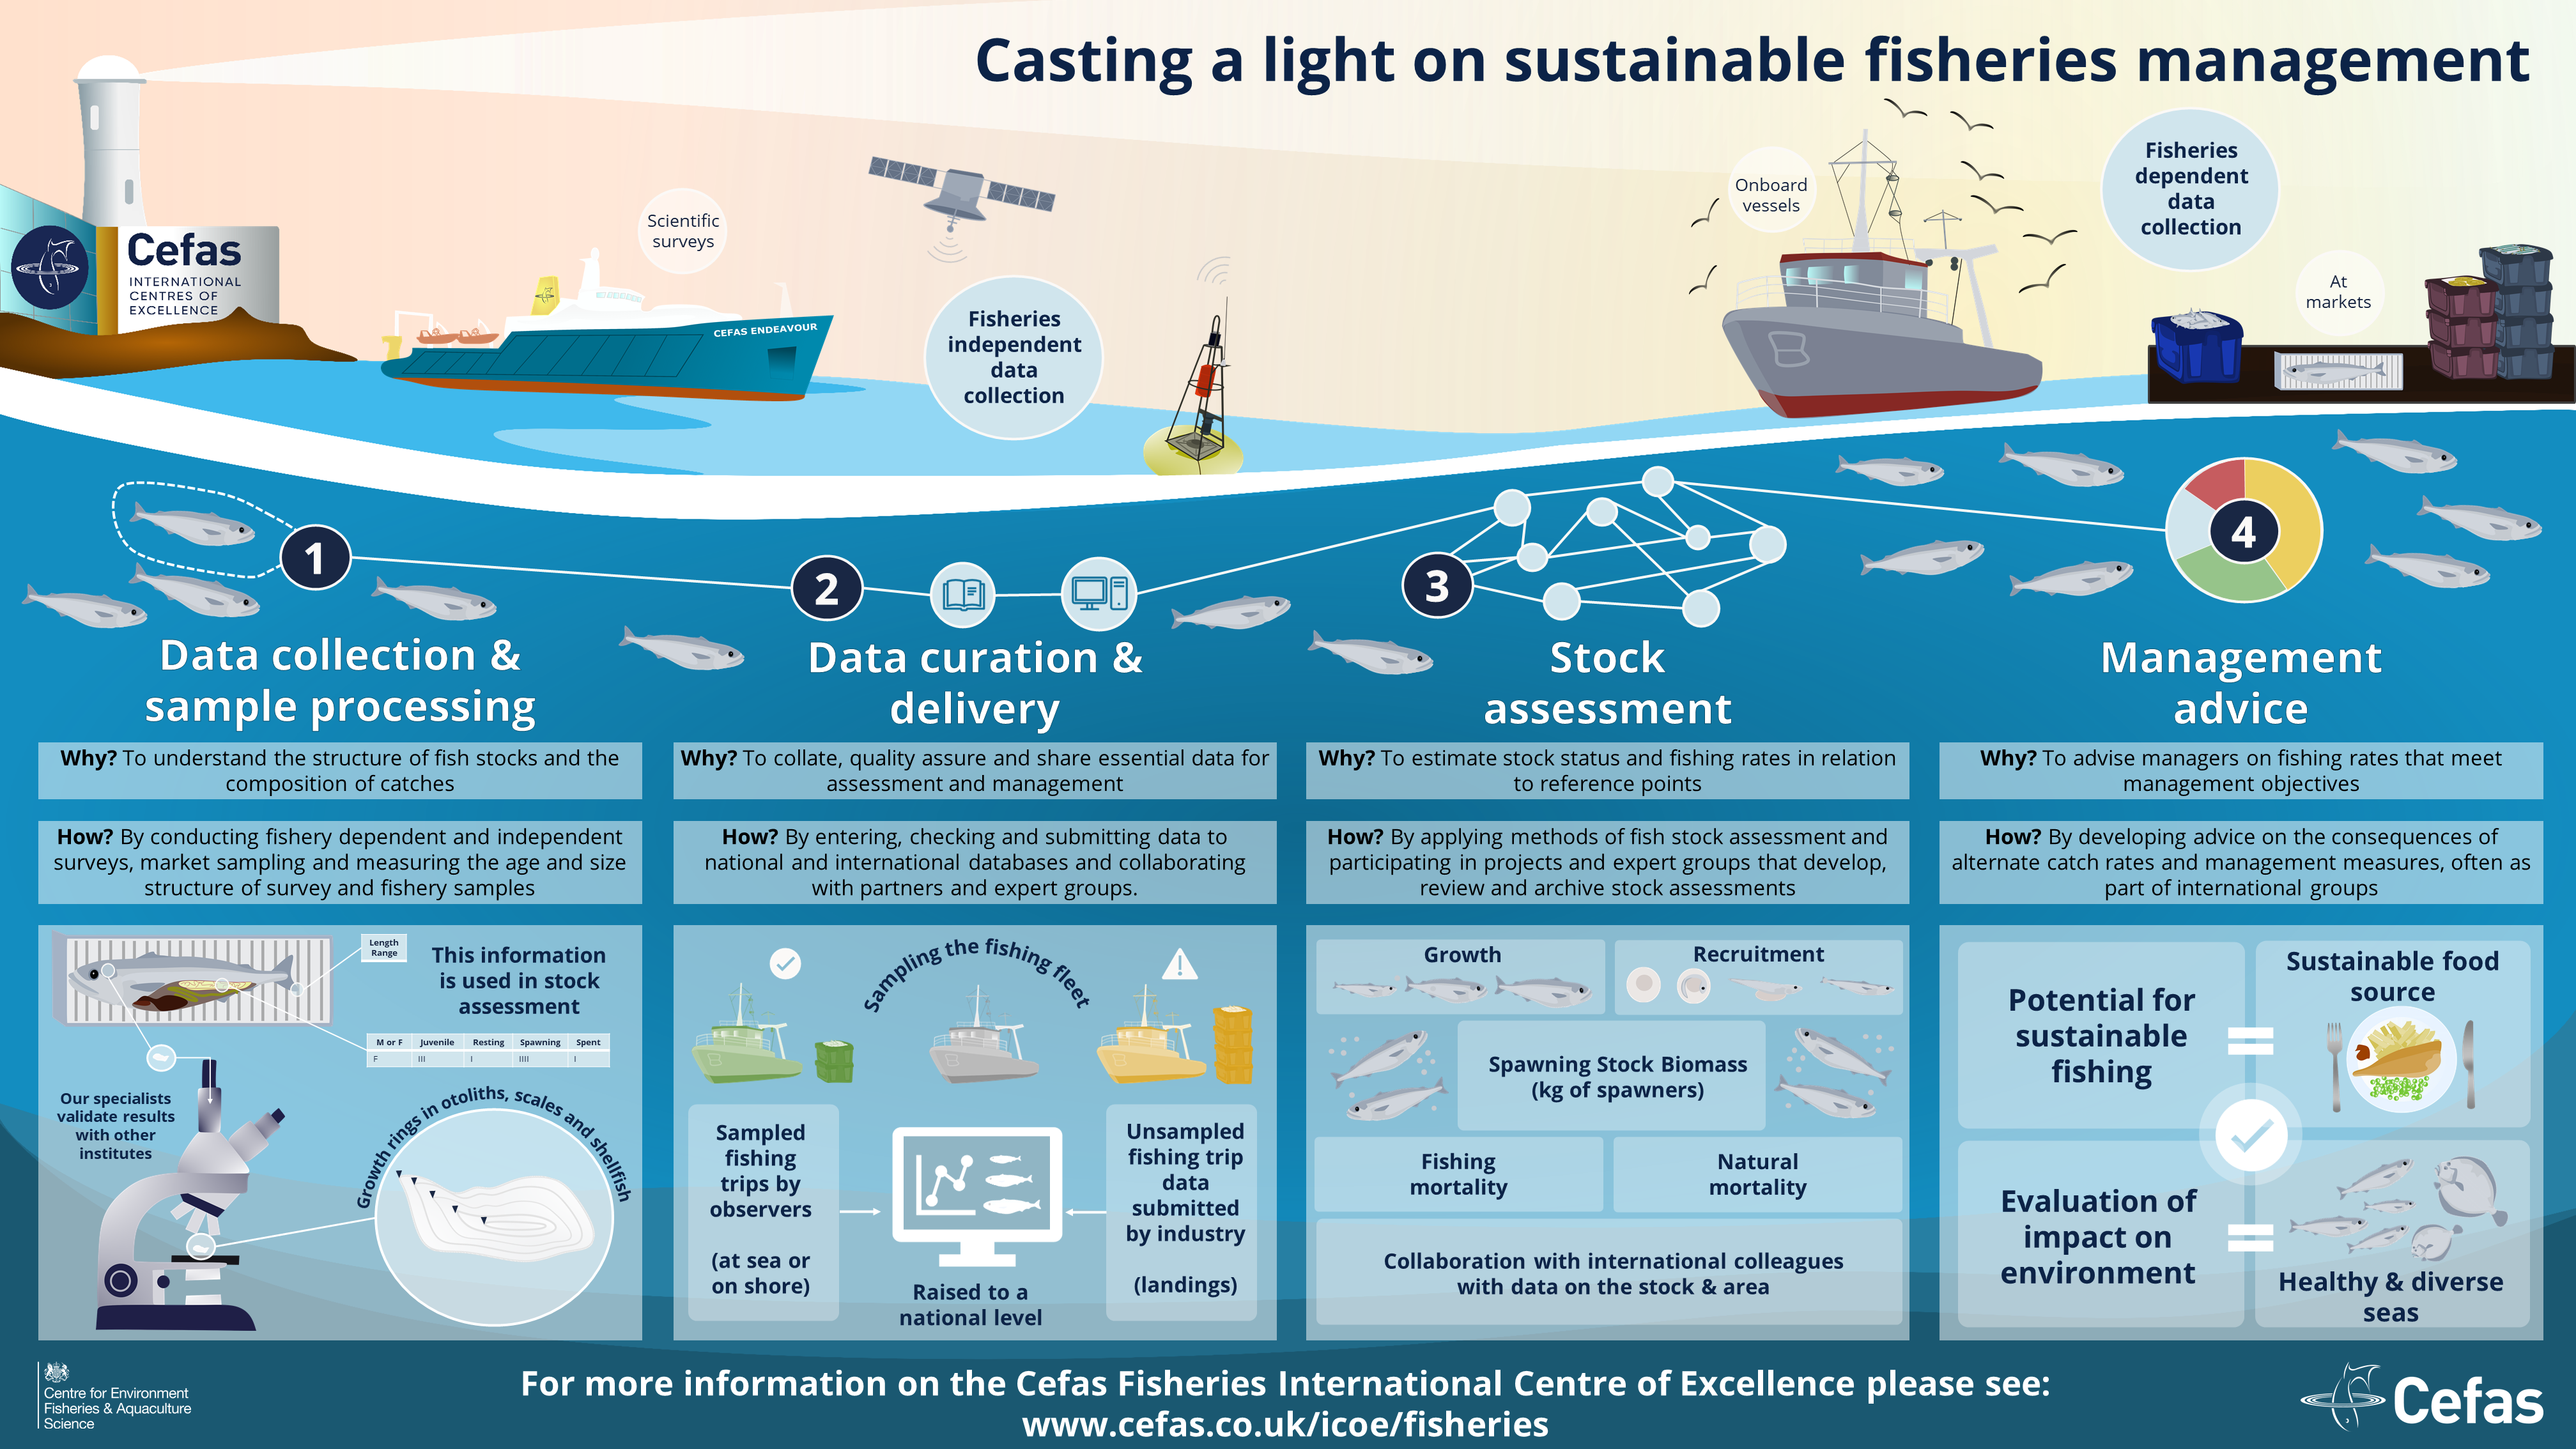 Infographic showing the process of sustainable fisheries management by Cefas from: data collection & sample processing, Data curation & delivery, Stock assessment and Management advice to celebrate the launch of the Cefas International Centre of Excellence for fisheries.